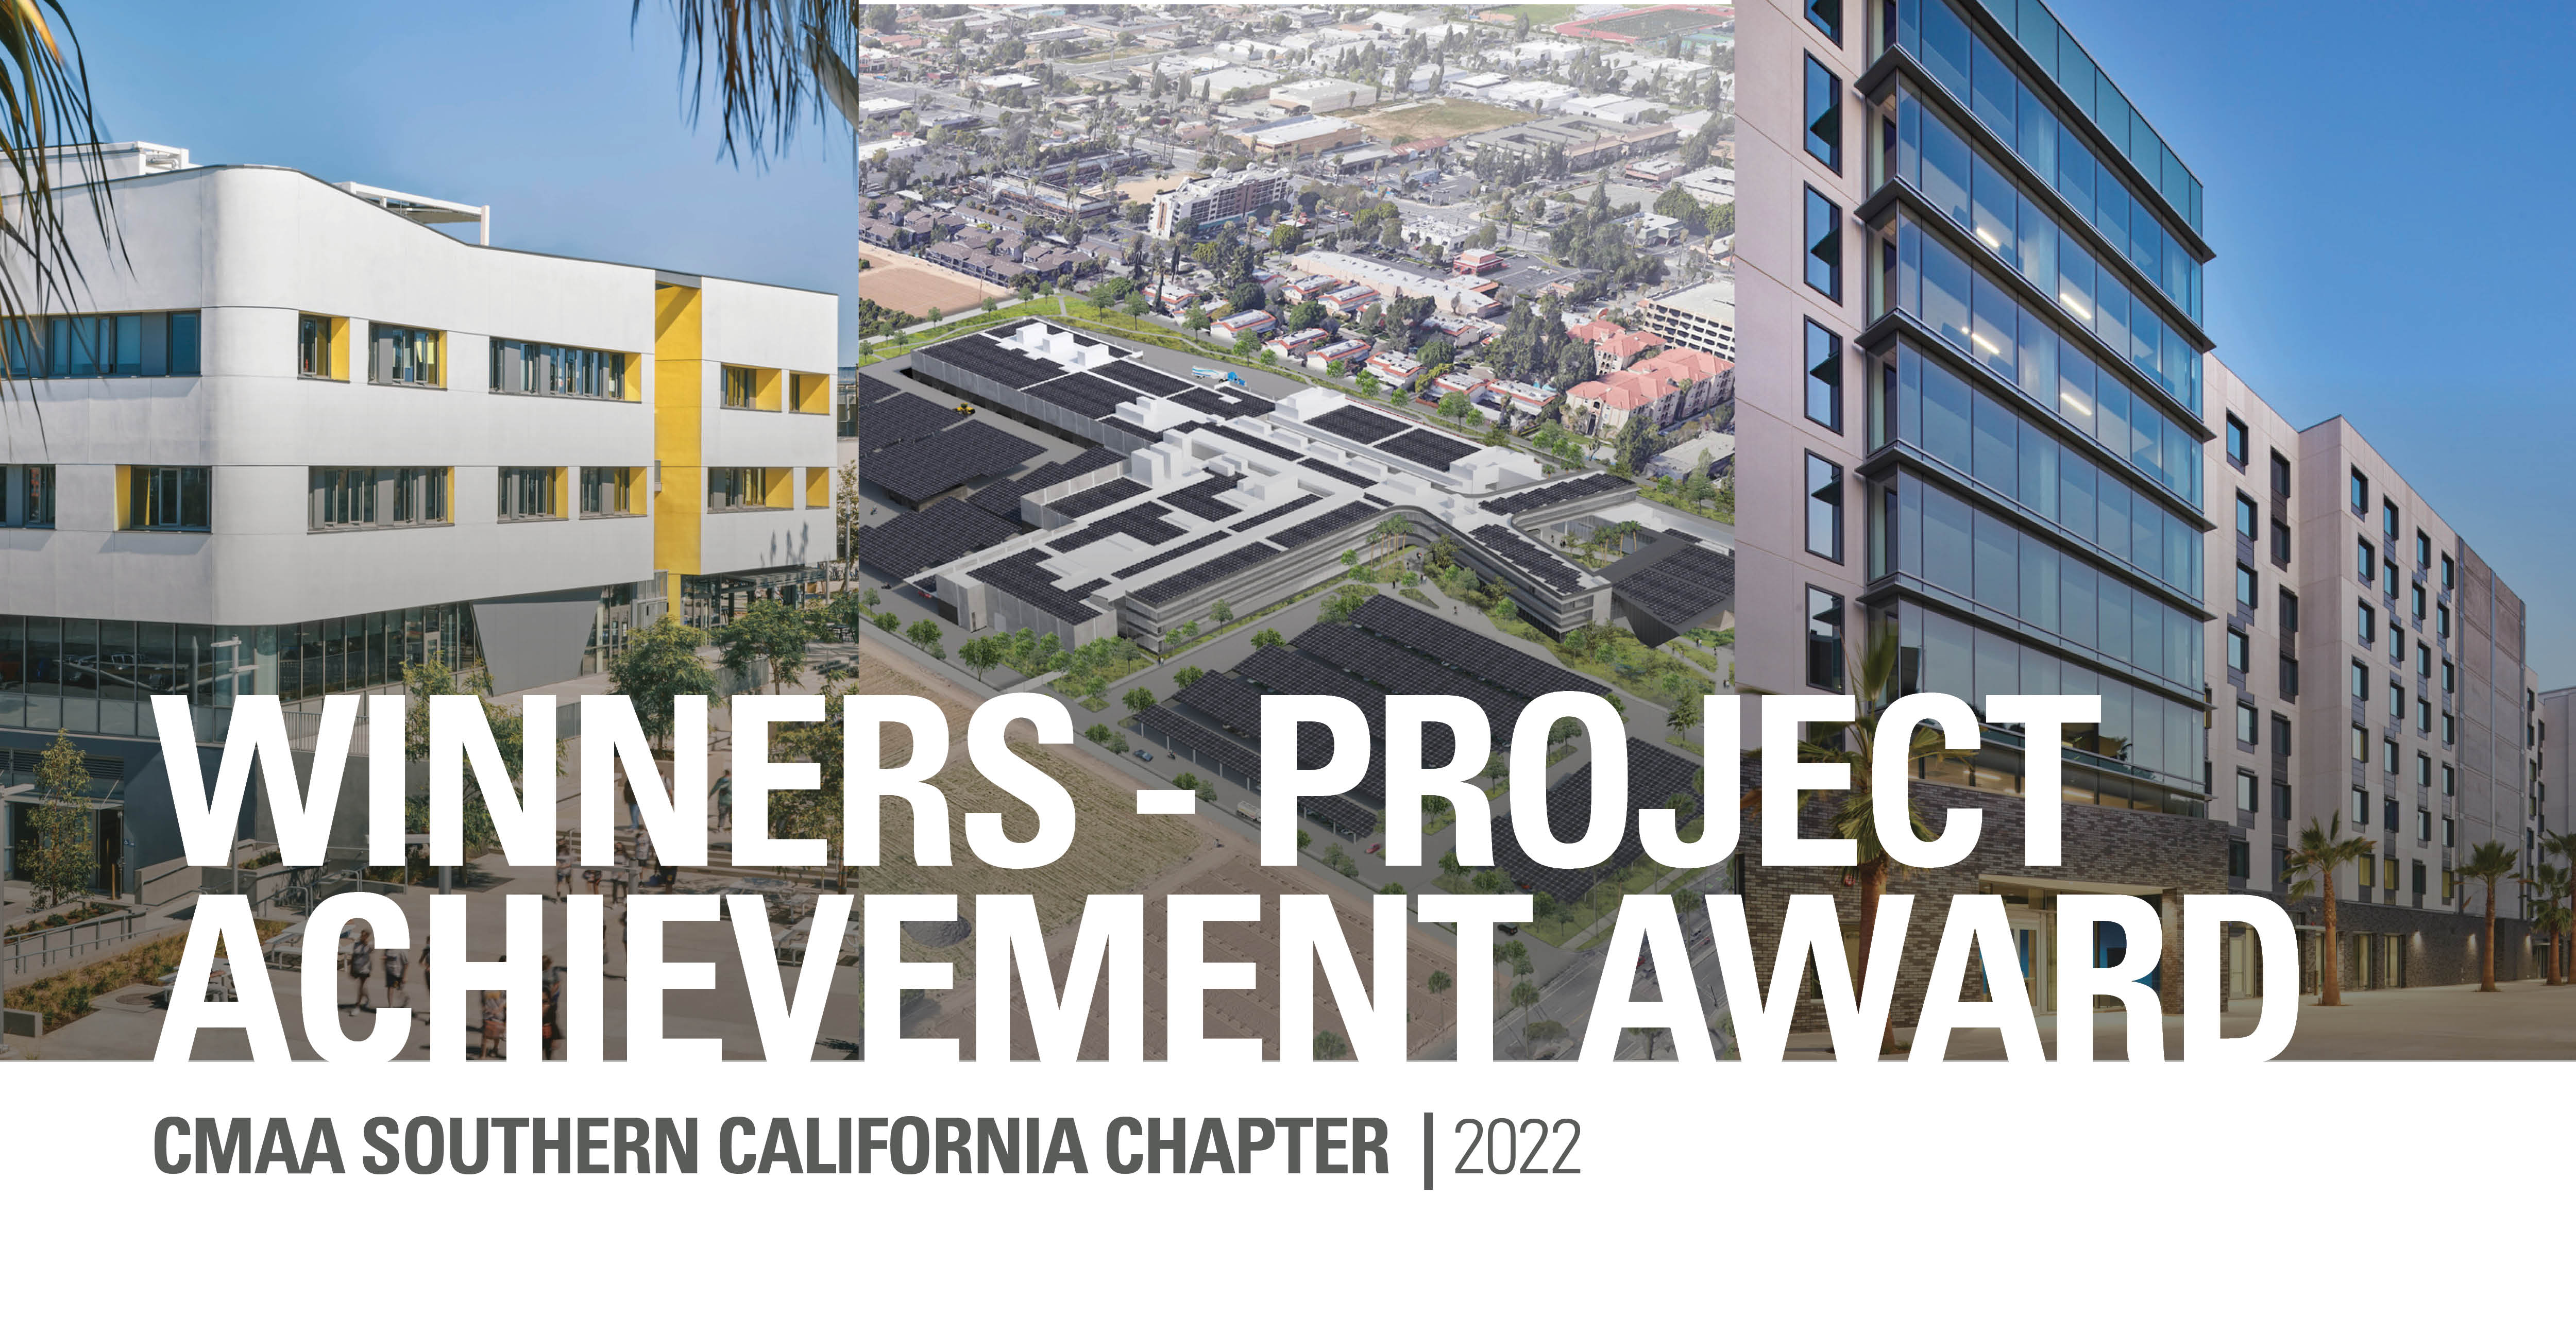 /SAMOHI%20Discovery%2C%20California%20Air%20Resources%20Board%20%28CARB%29%2C%20and%20CSULA%20Housing%20have%20all%20won%20Construction%20Management%20Association%20of%20America%20%28CMAA%29%20Southern%20California%20Chapter%20Project%20Achievement%20Awards